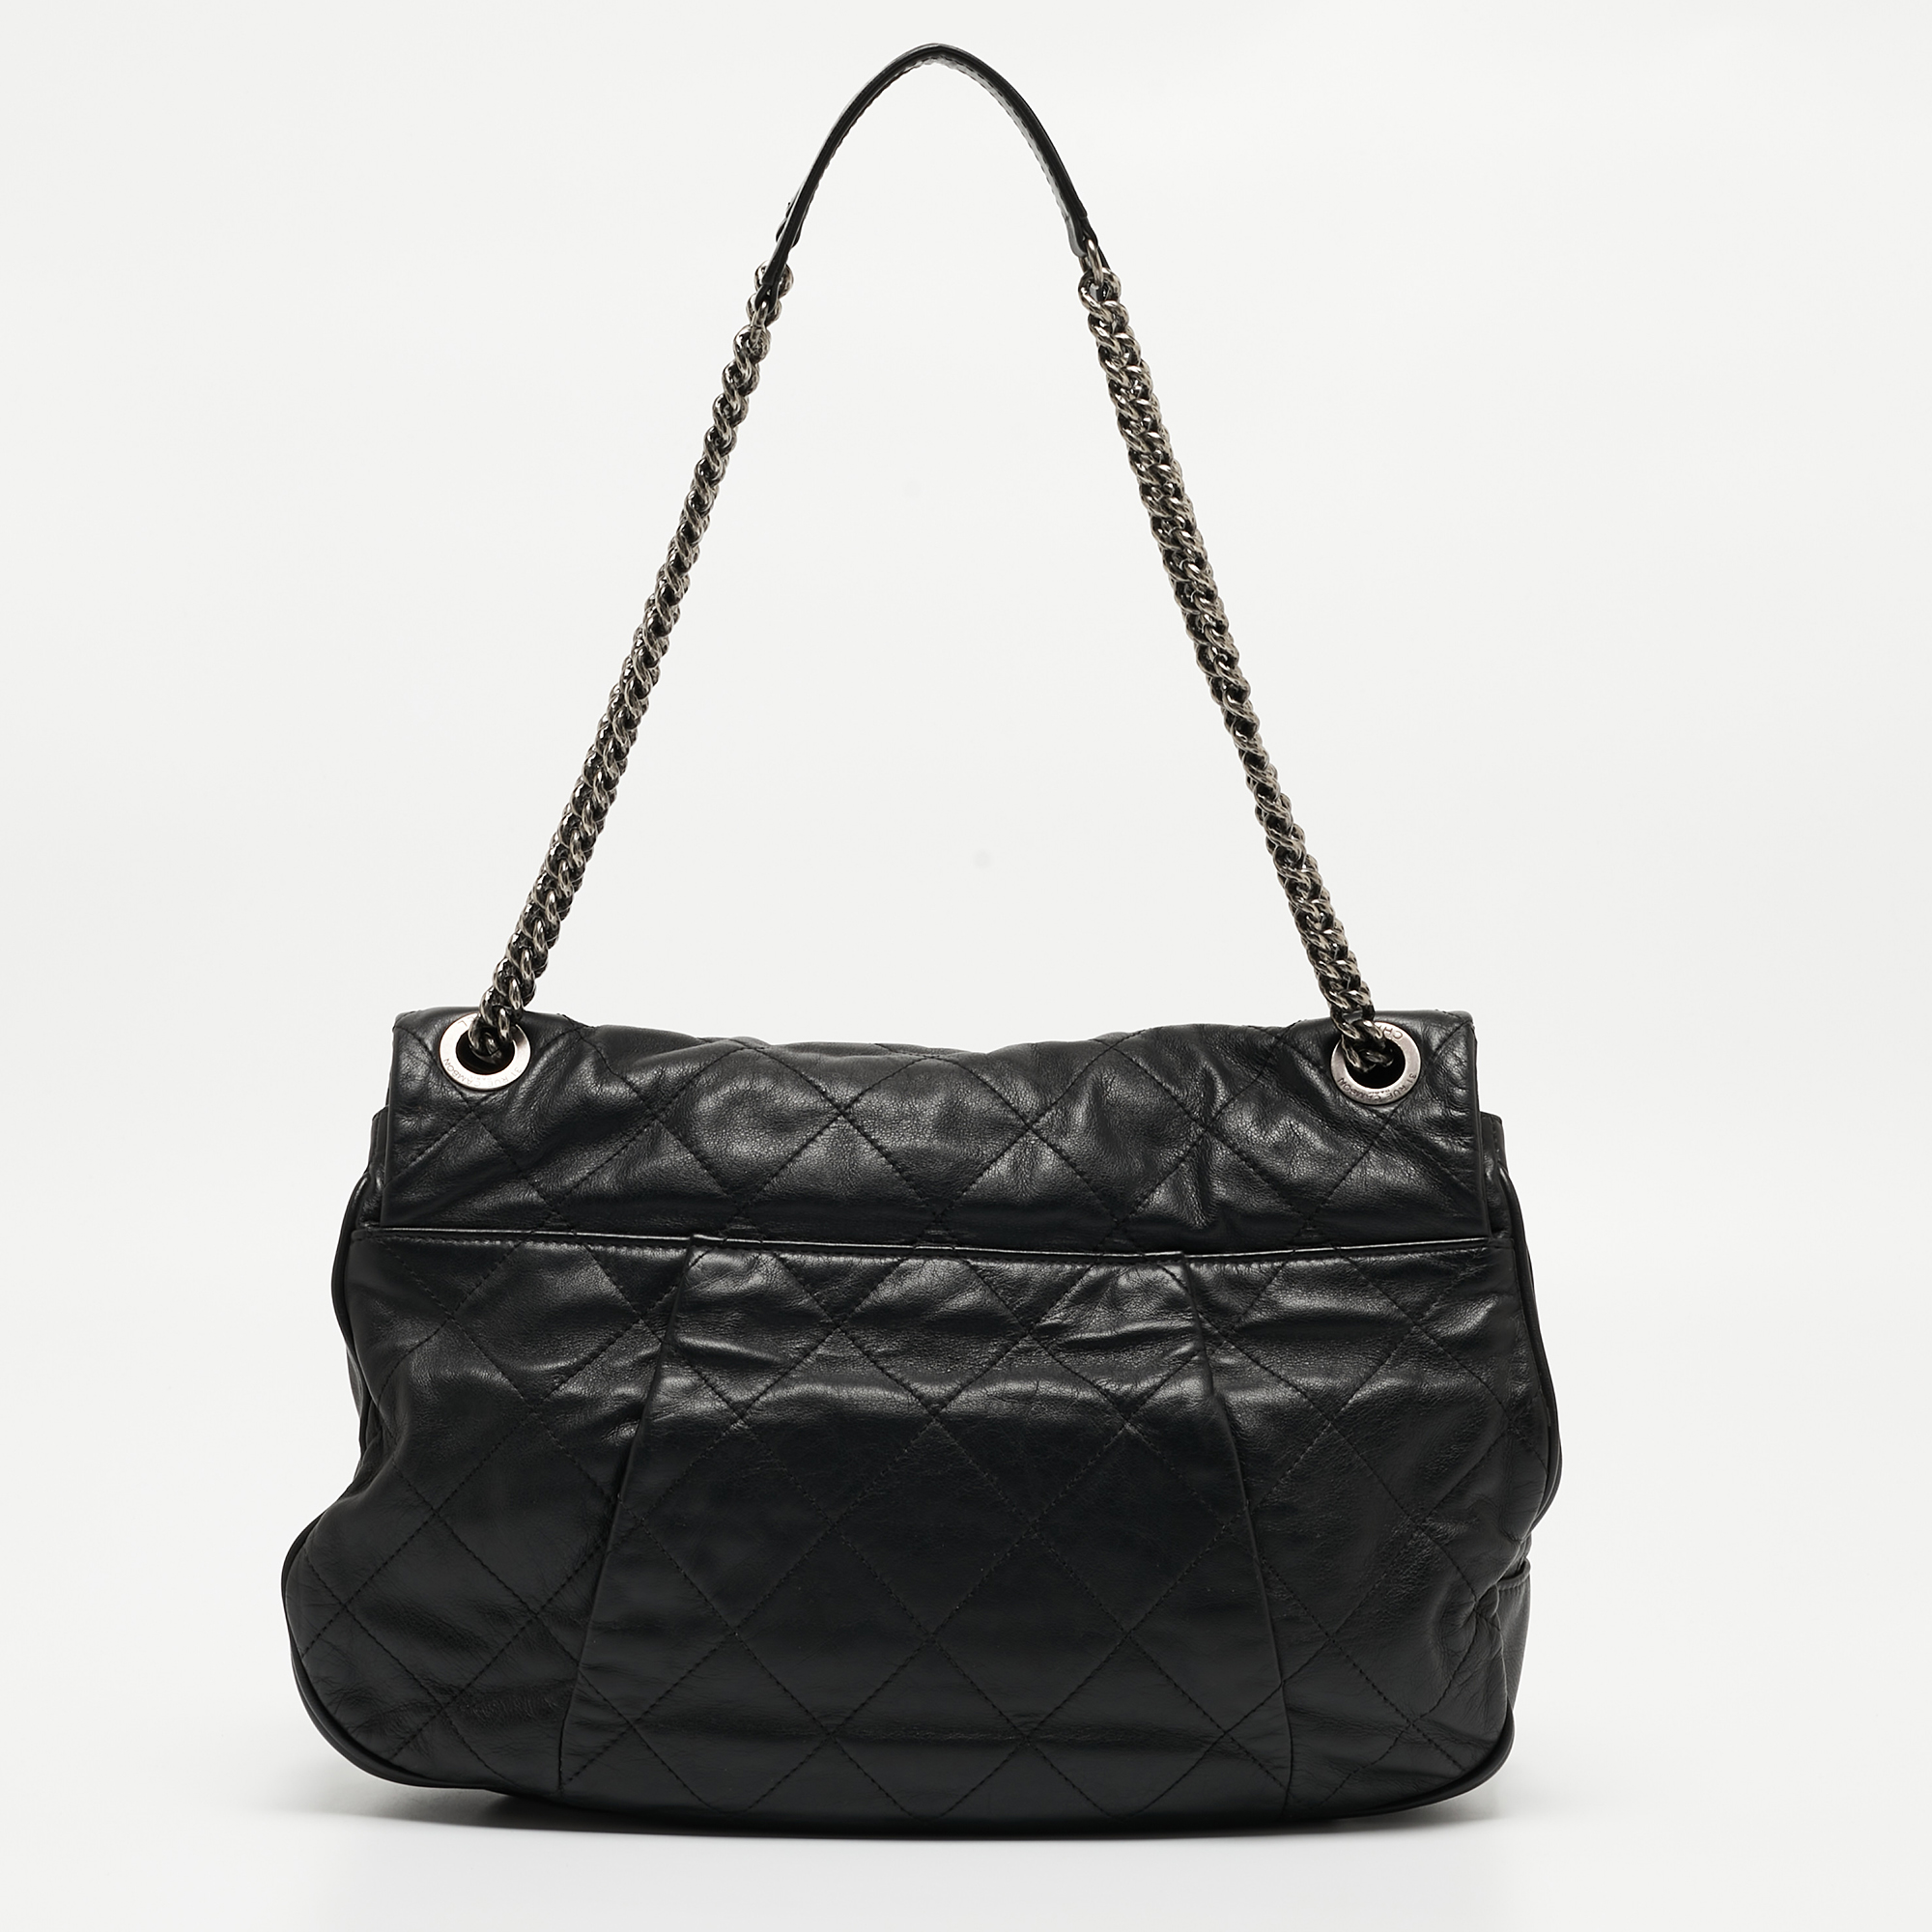 Chanel Black Quilted Leather Coco Pleats Flap Bag